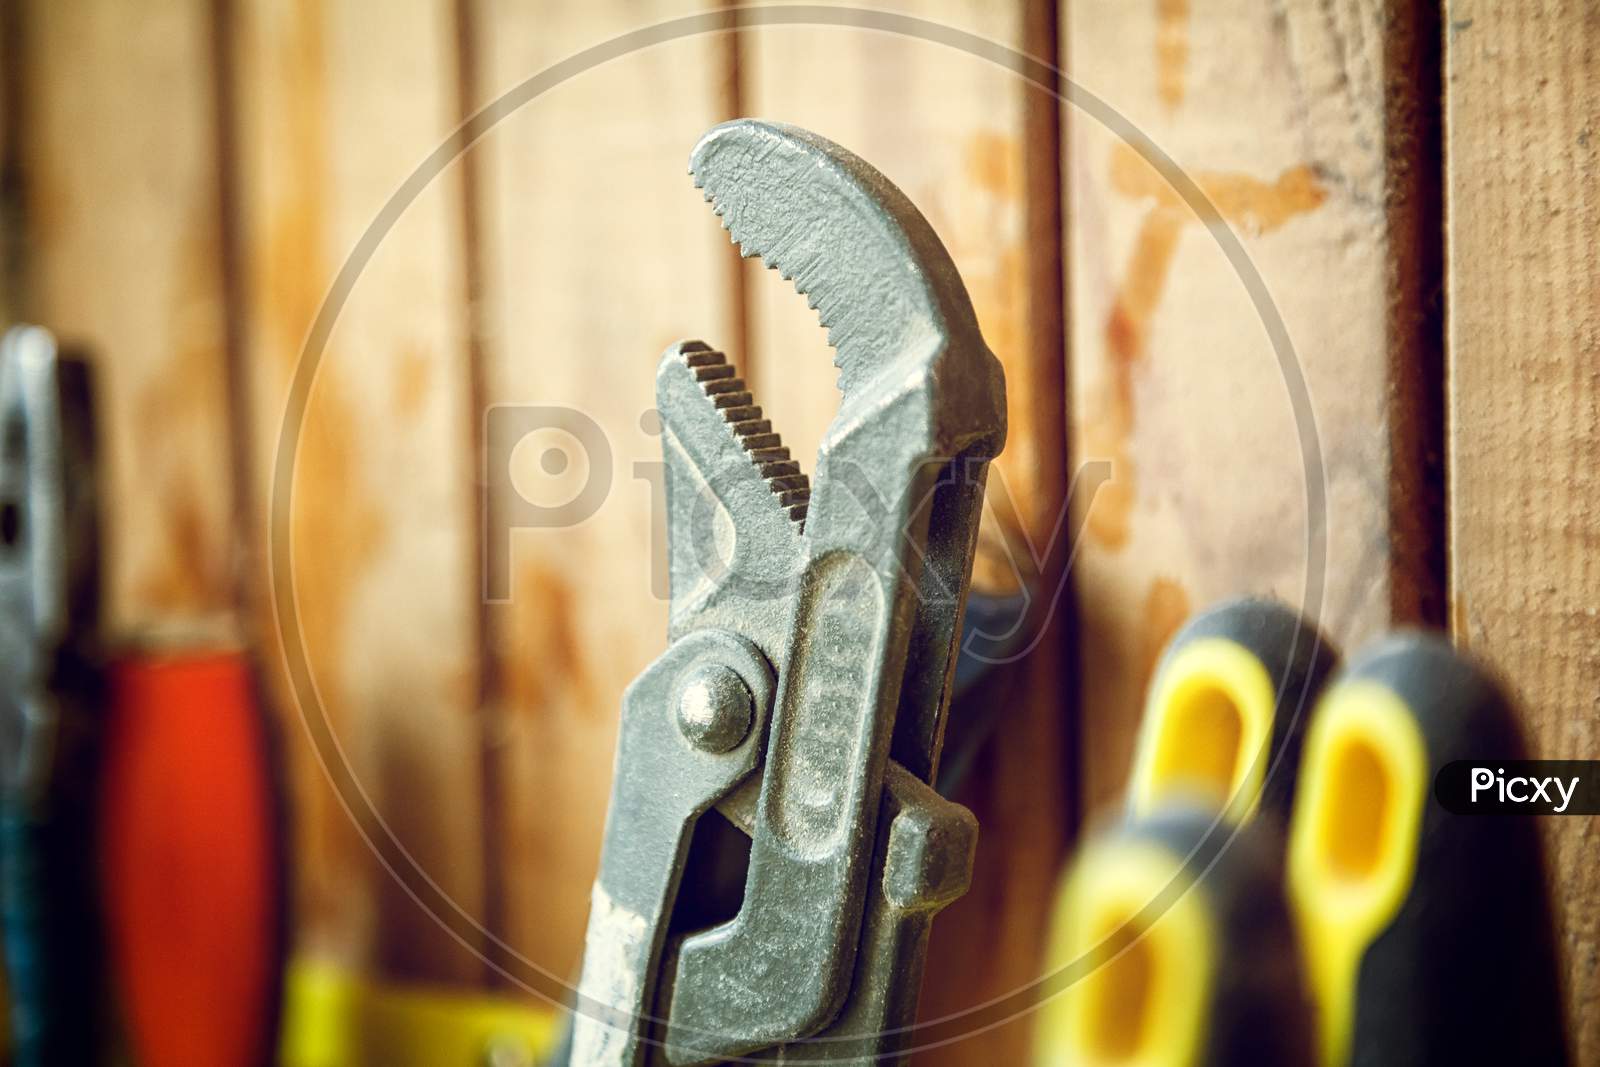 A Close-Up Of A Set Of Tools: Pliers, A Screwdriver, A Wrench On A Yellow Stand